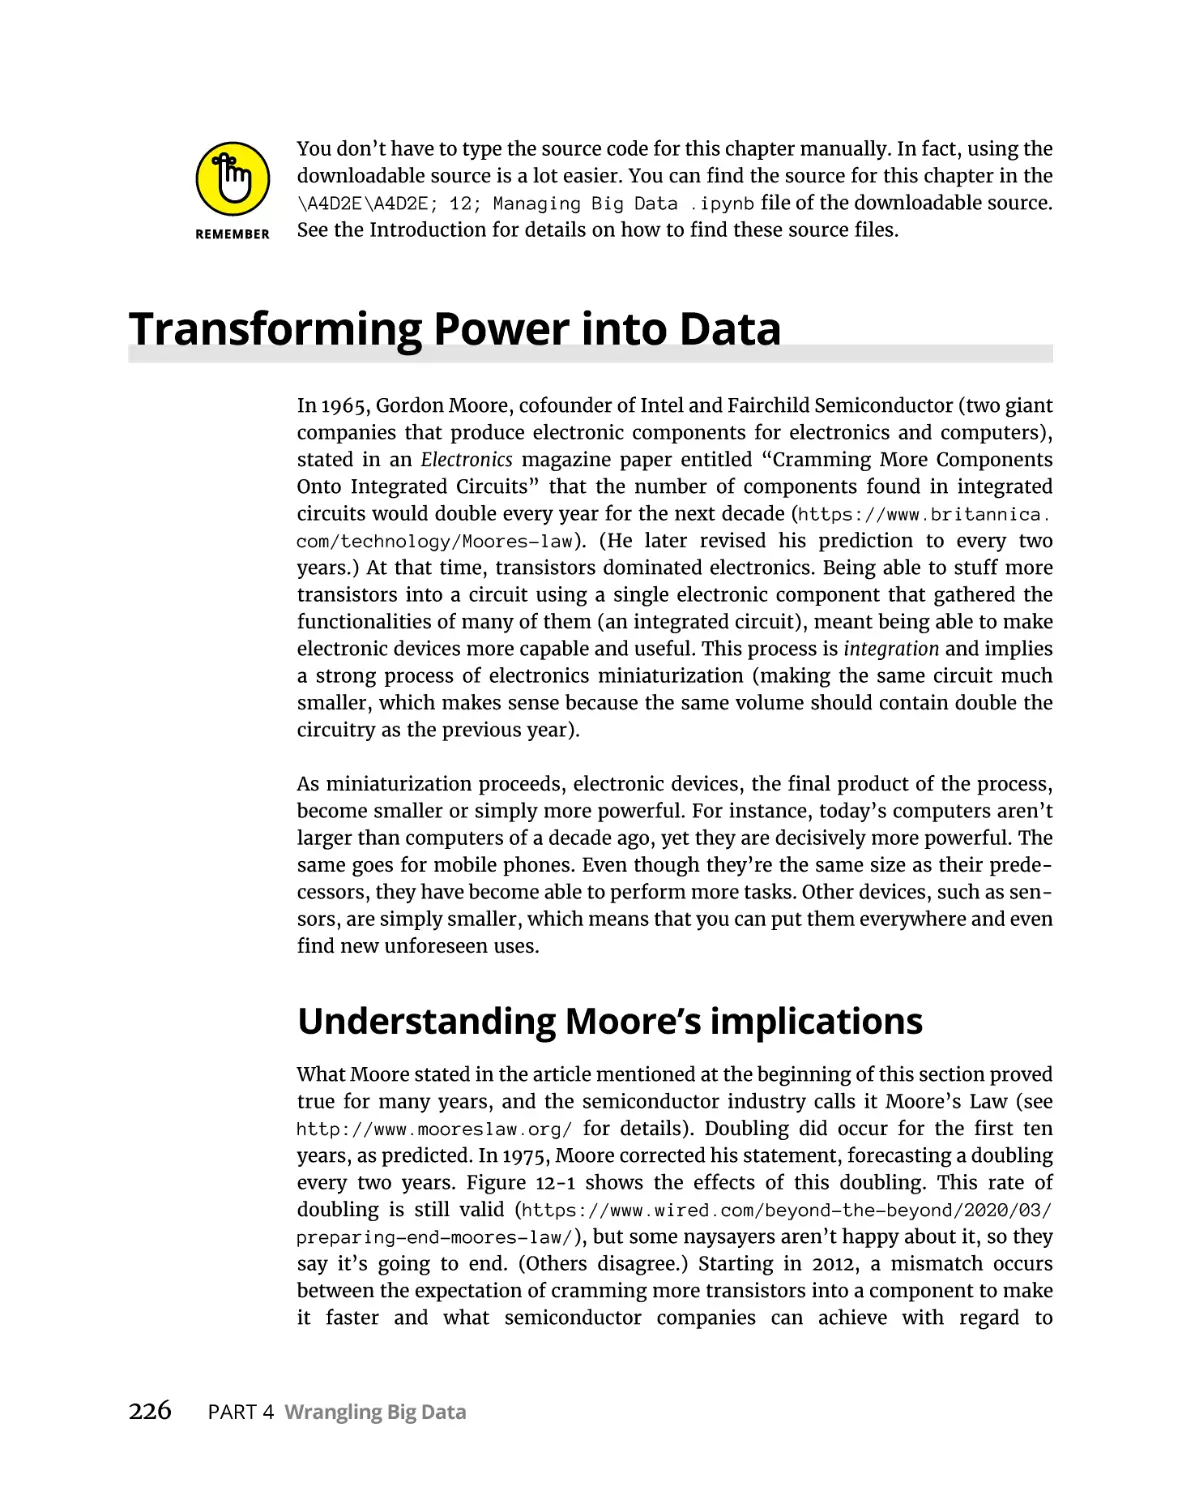 Transforming Power into Data
Understanding Moore’s implications